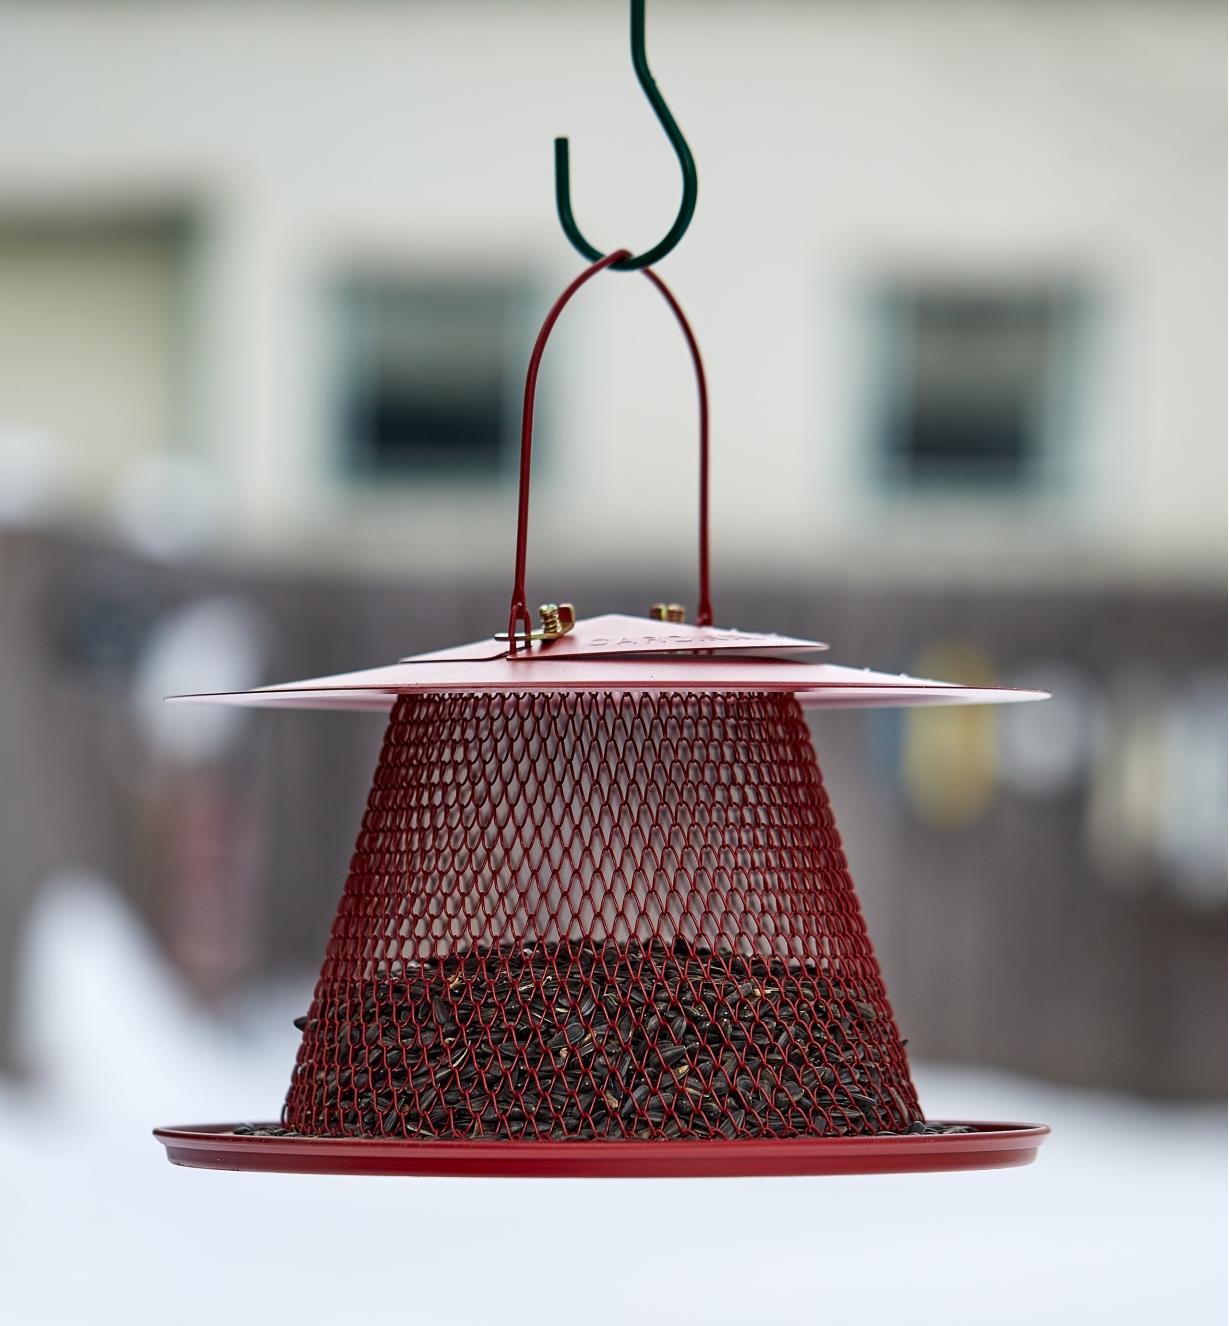 A collapsible bird feeder half full of seeds hangs from a hook outdoors